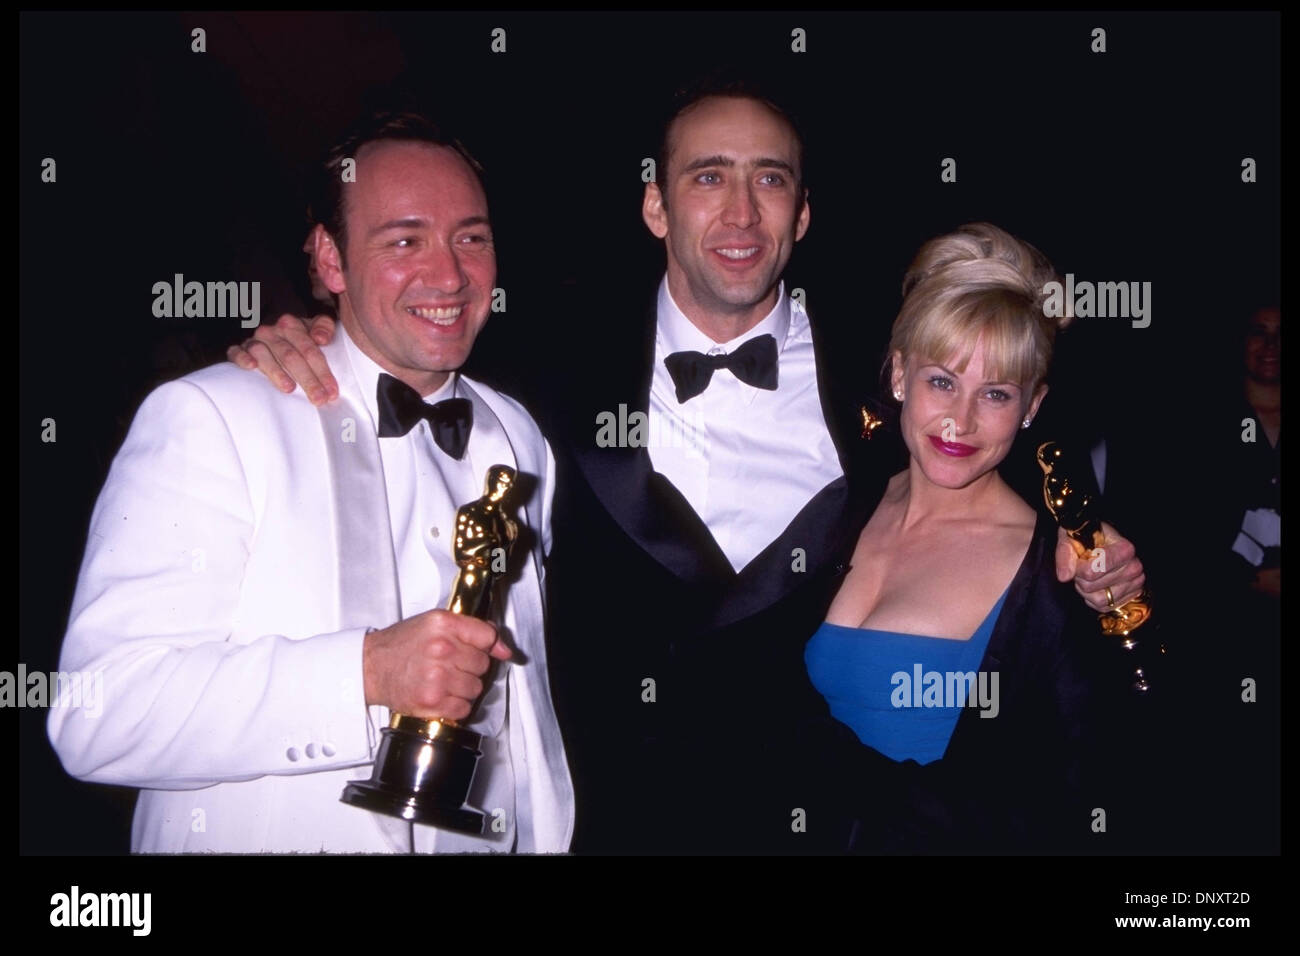 March 25, 1996.  NICOLAS CAGE with his Best Actor Oscar for 'Leaving Las Vegas,' KEVIN SPACEY with his Best Supporting Actor for 'The Usual Suspects, ' and PATRICIA ARQUETTE attend the Vanity Fair Oscar party held at Morton's.   Mandatory Credit: Kathy Hutchins/ZUMA Press. (©) Kathy Hutchins Stock Photo